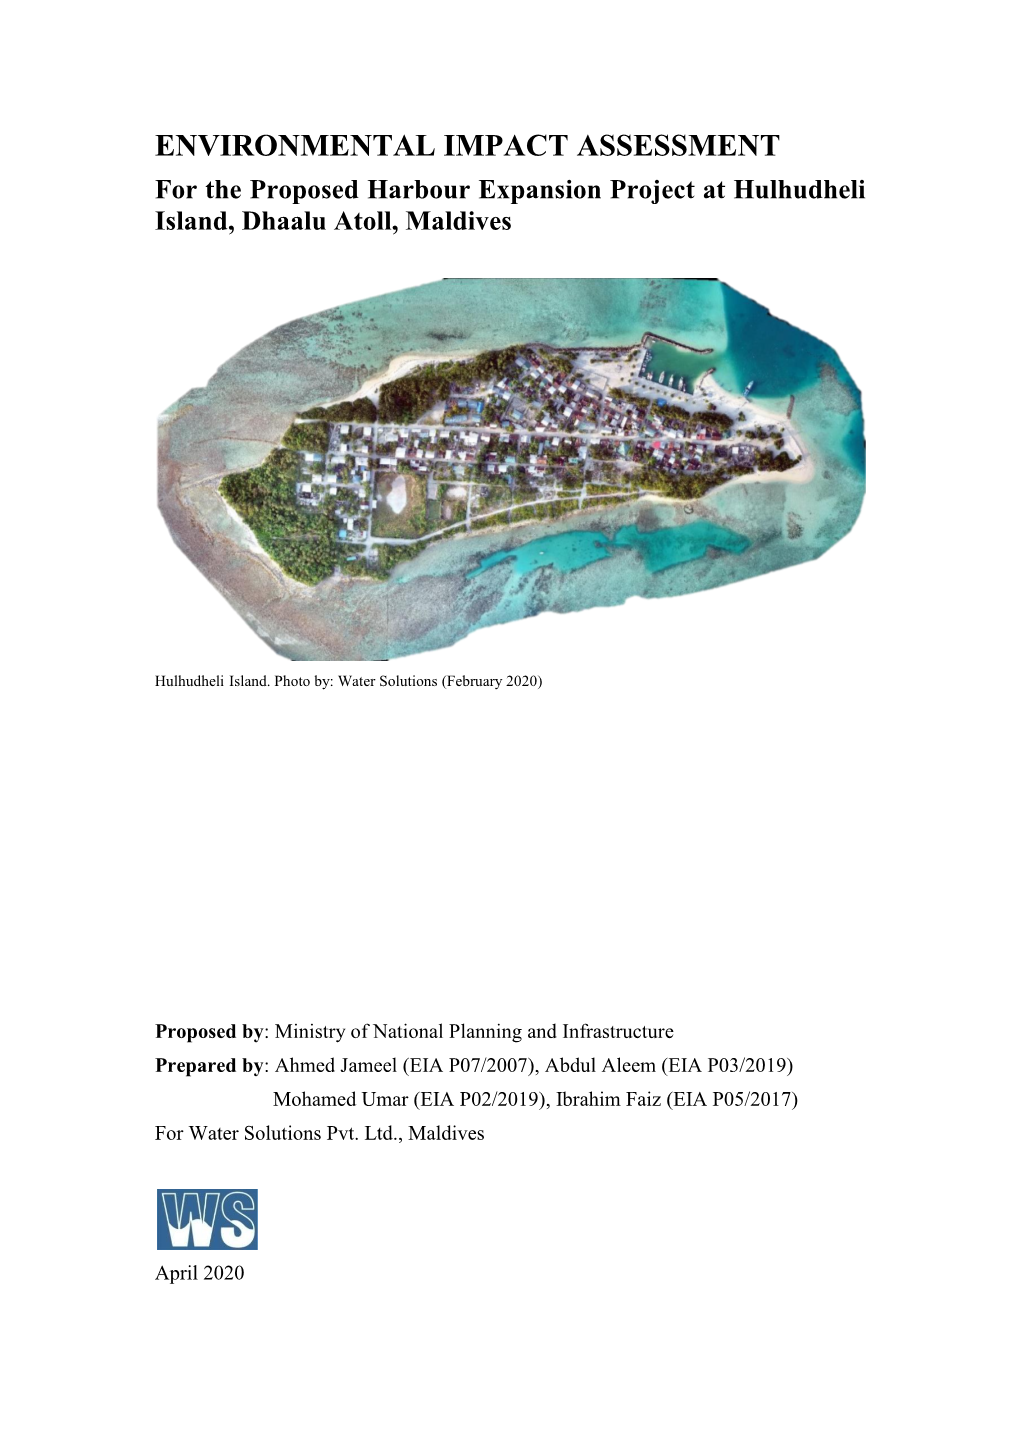 For the Proposed Harbour Expansion Project at Hulhudheli Island, Dhaalu Atoll, Maldives